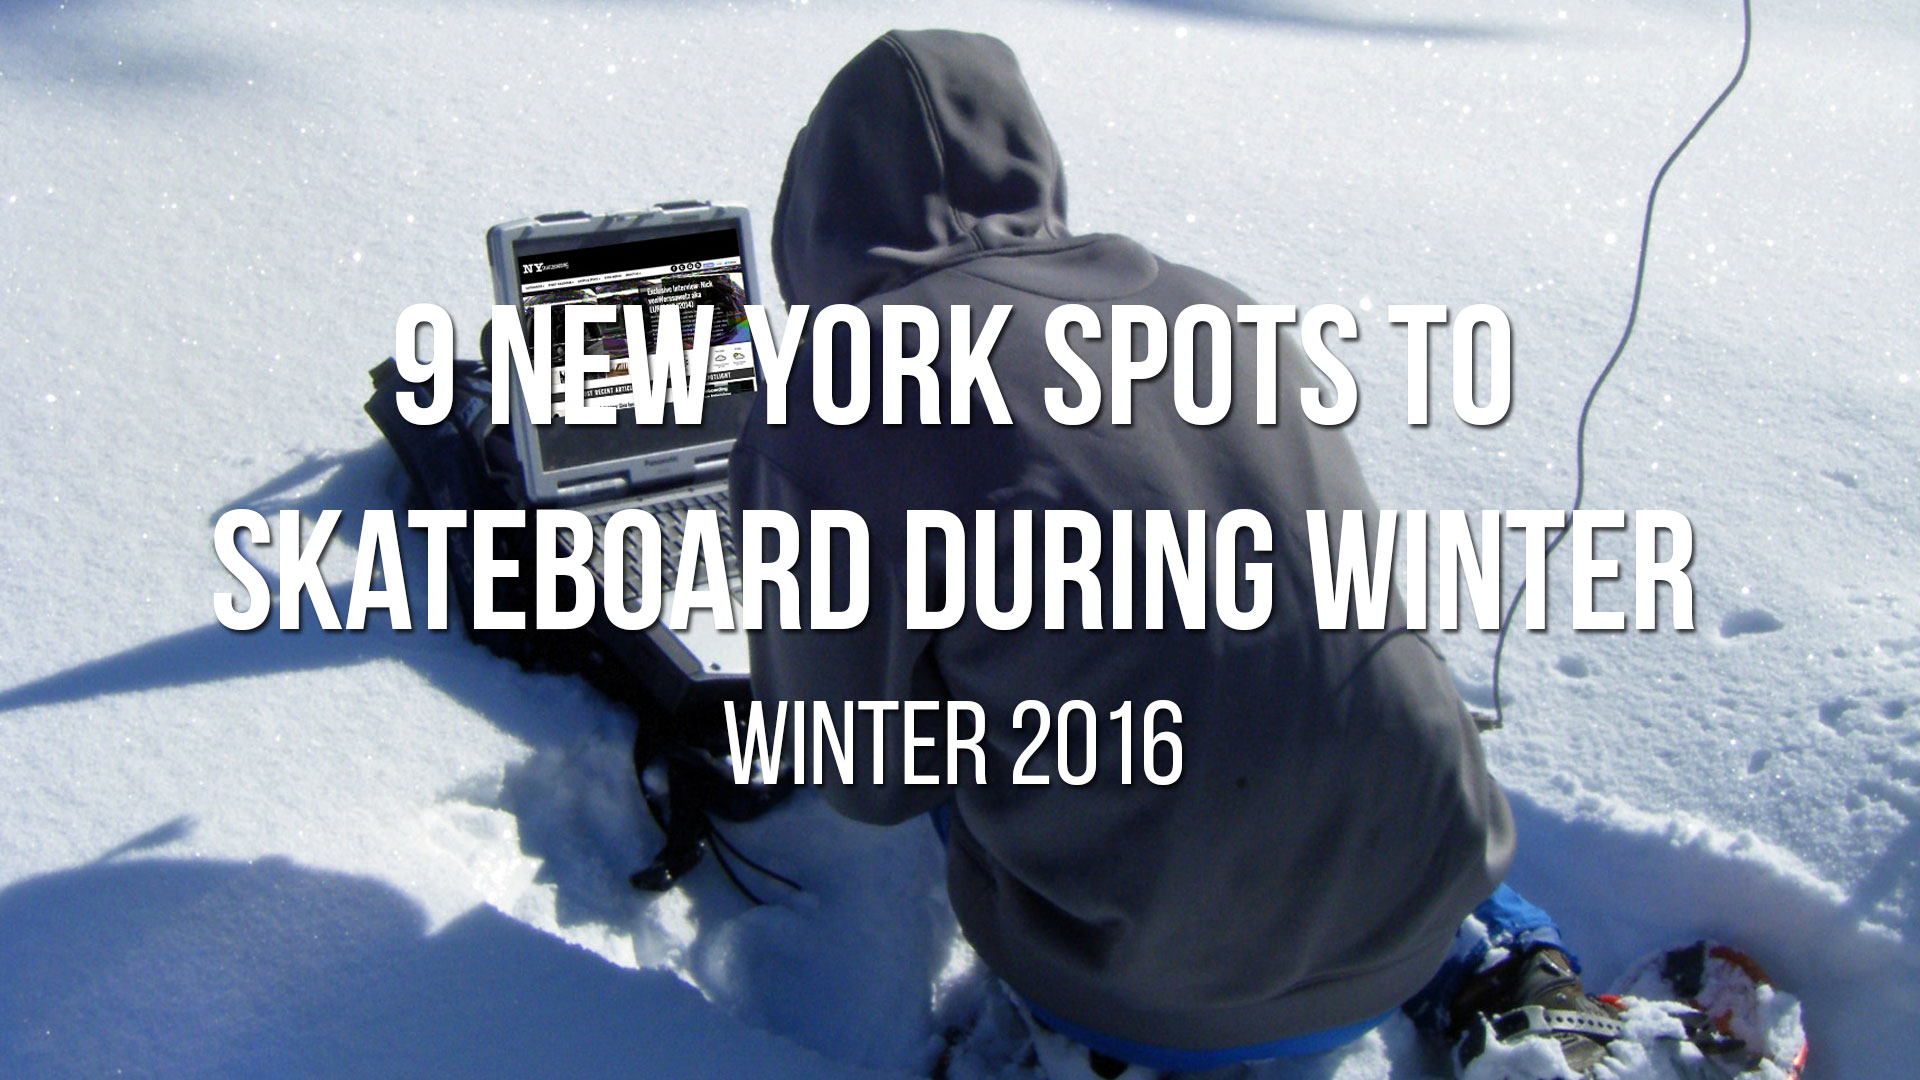 9 New York Spots to Skateboard During Winter (2016)